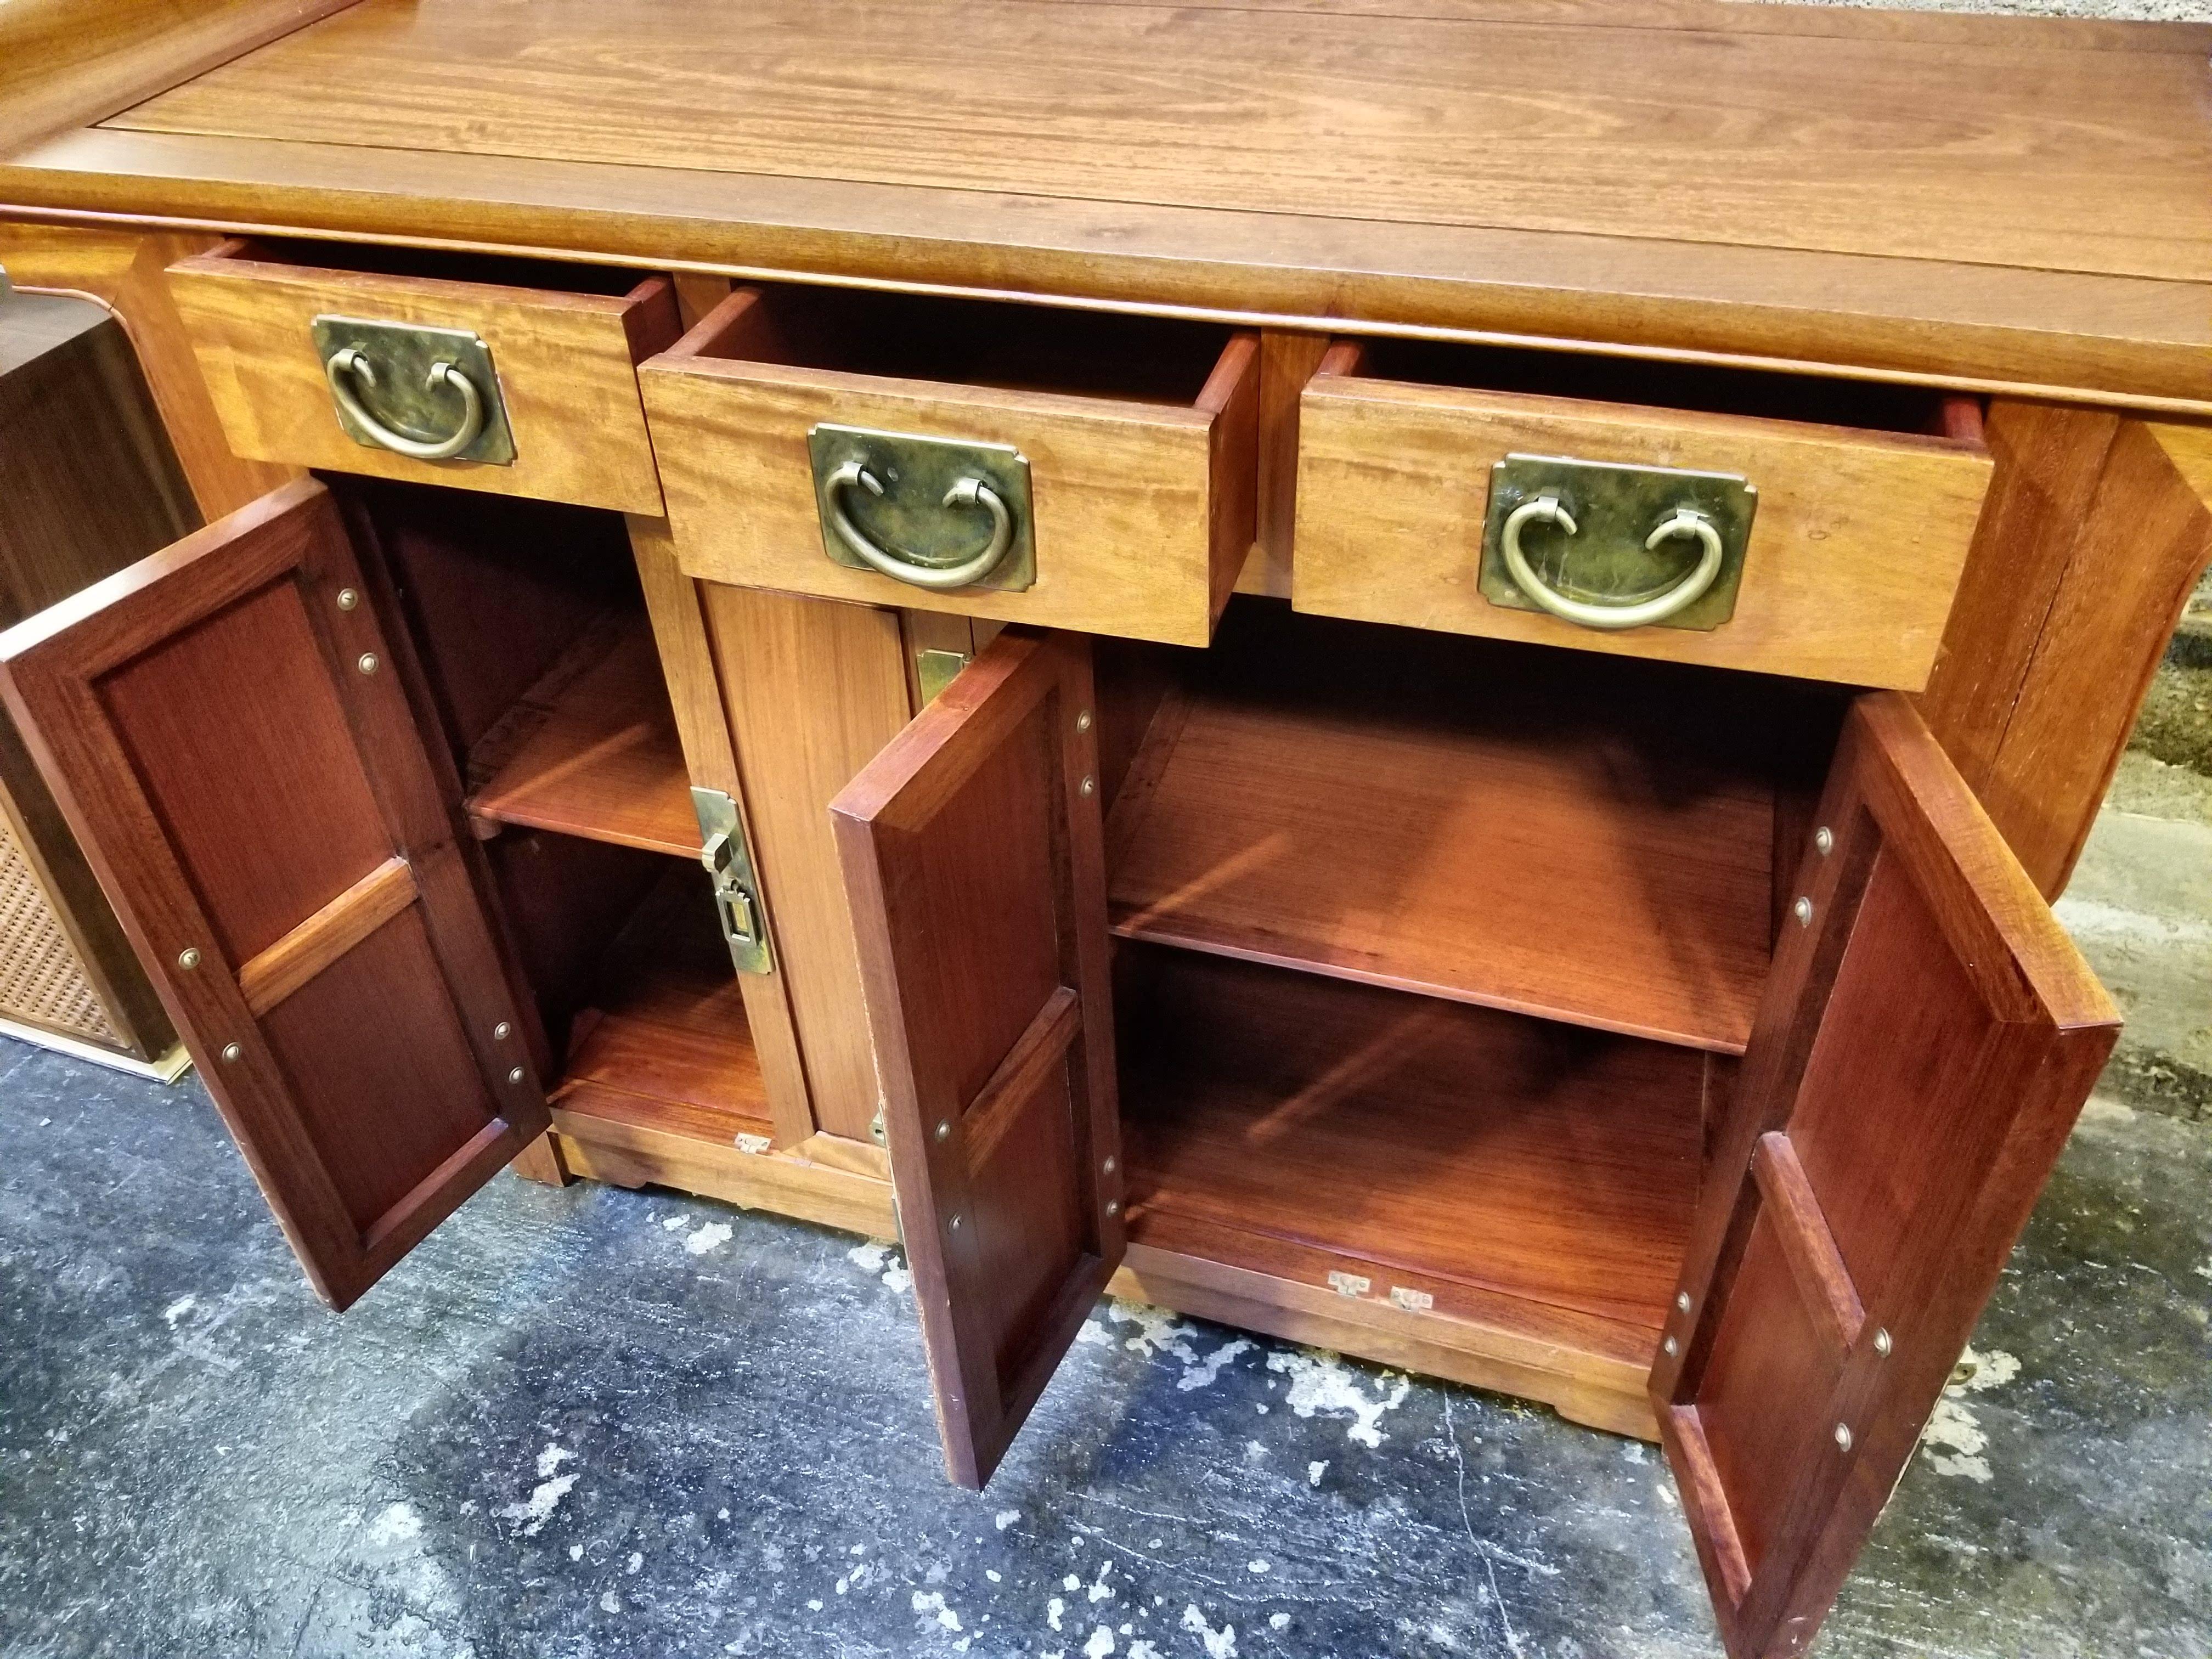 A fine Chinese Ming style cabinet made by George Zee Furniture Company. Works well as a console table or credenza. Amazing craftsmanship and materials in this piece as it is made entirely in a solid mahogany including the secondary woods. Notice